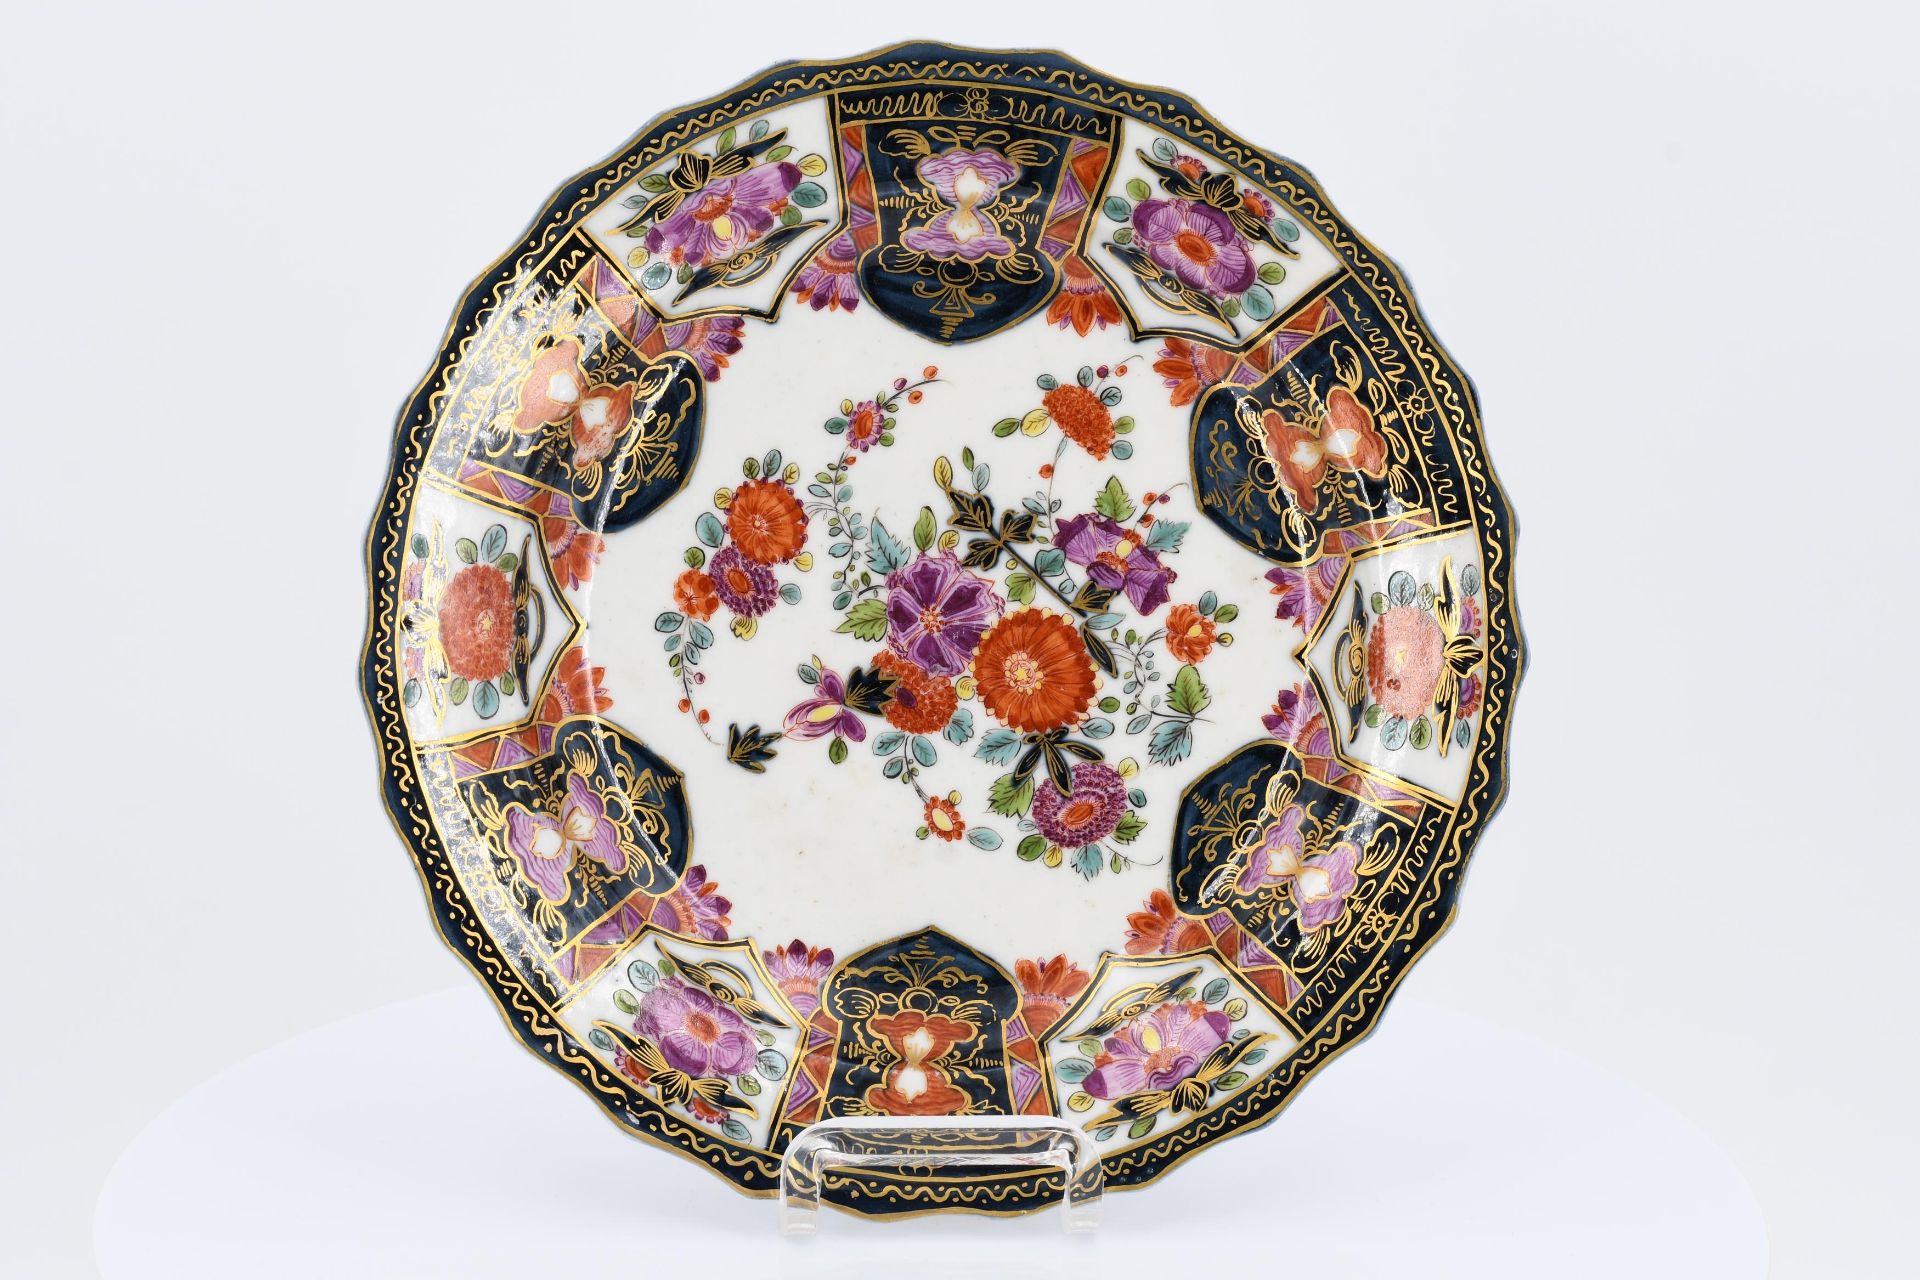 Porcelain plate with asian decor - Image 2 of 3